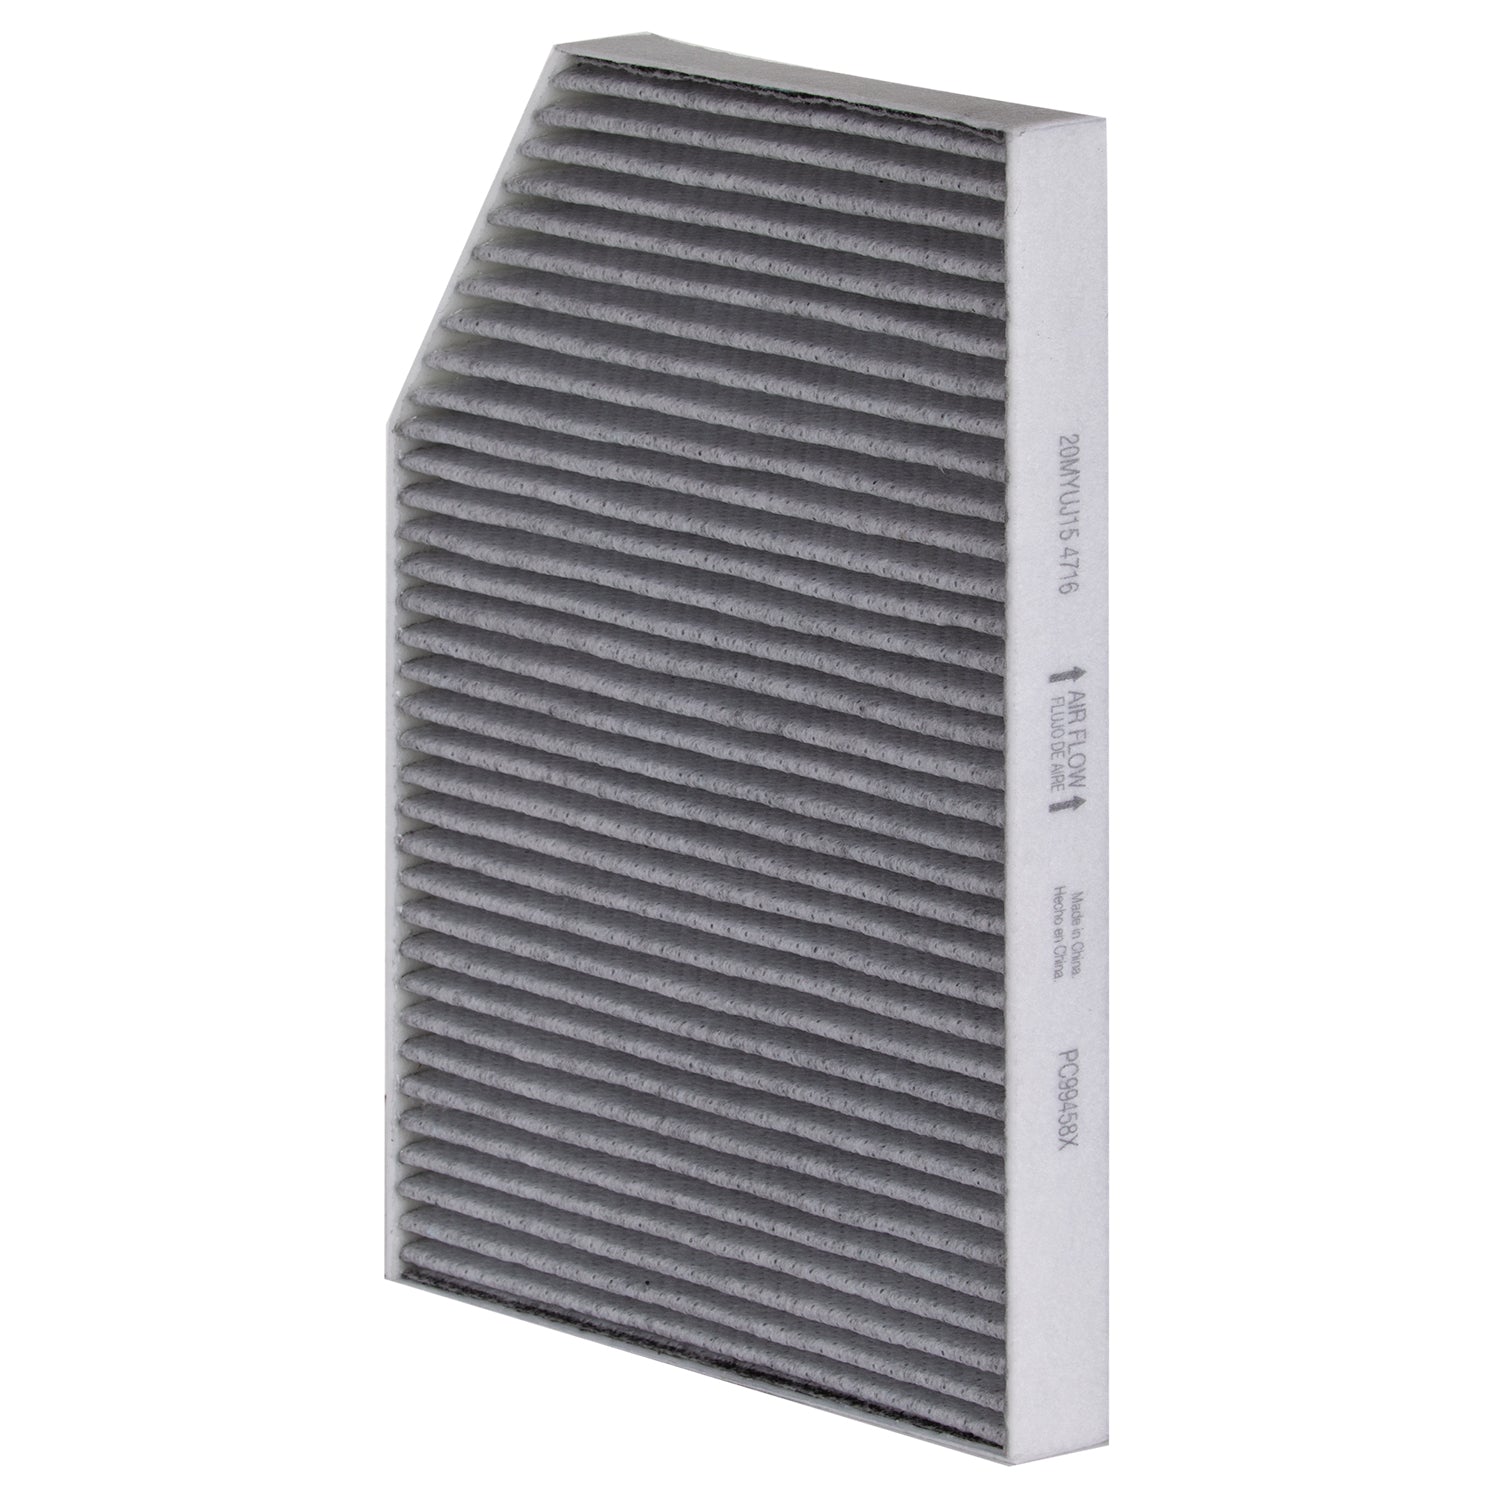 2021 BMW M340i Cabin Air Filter  PC99458X